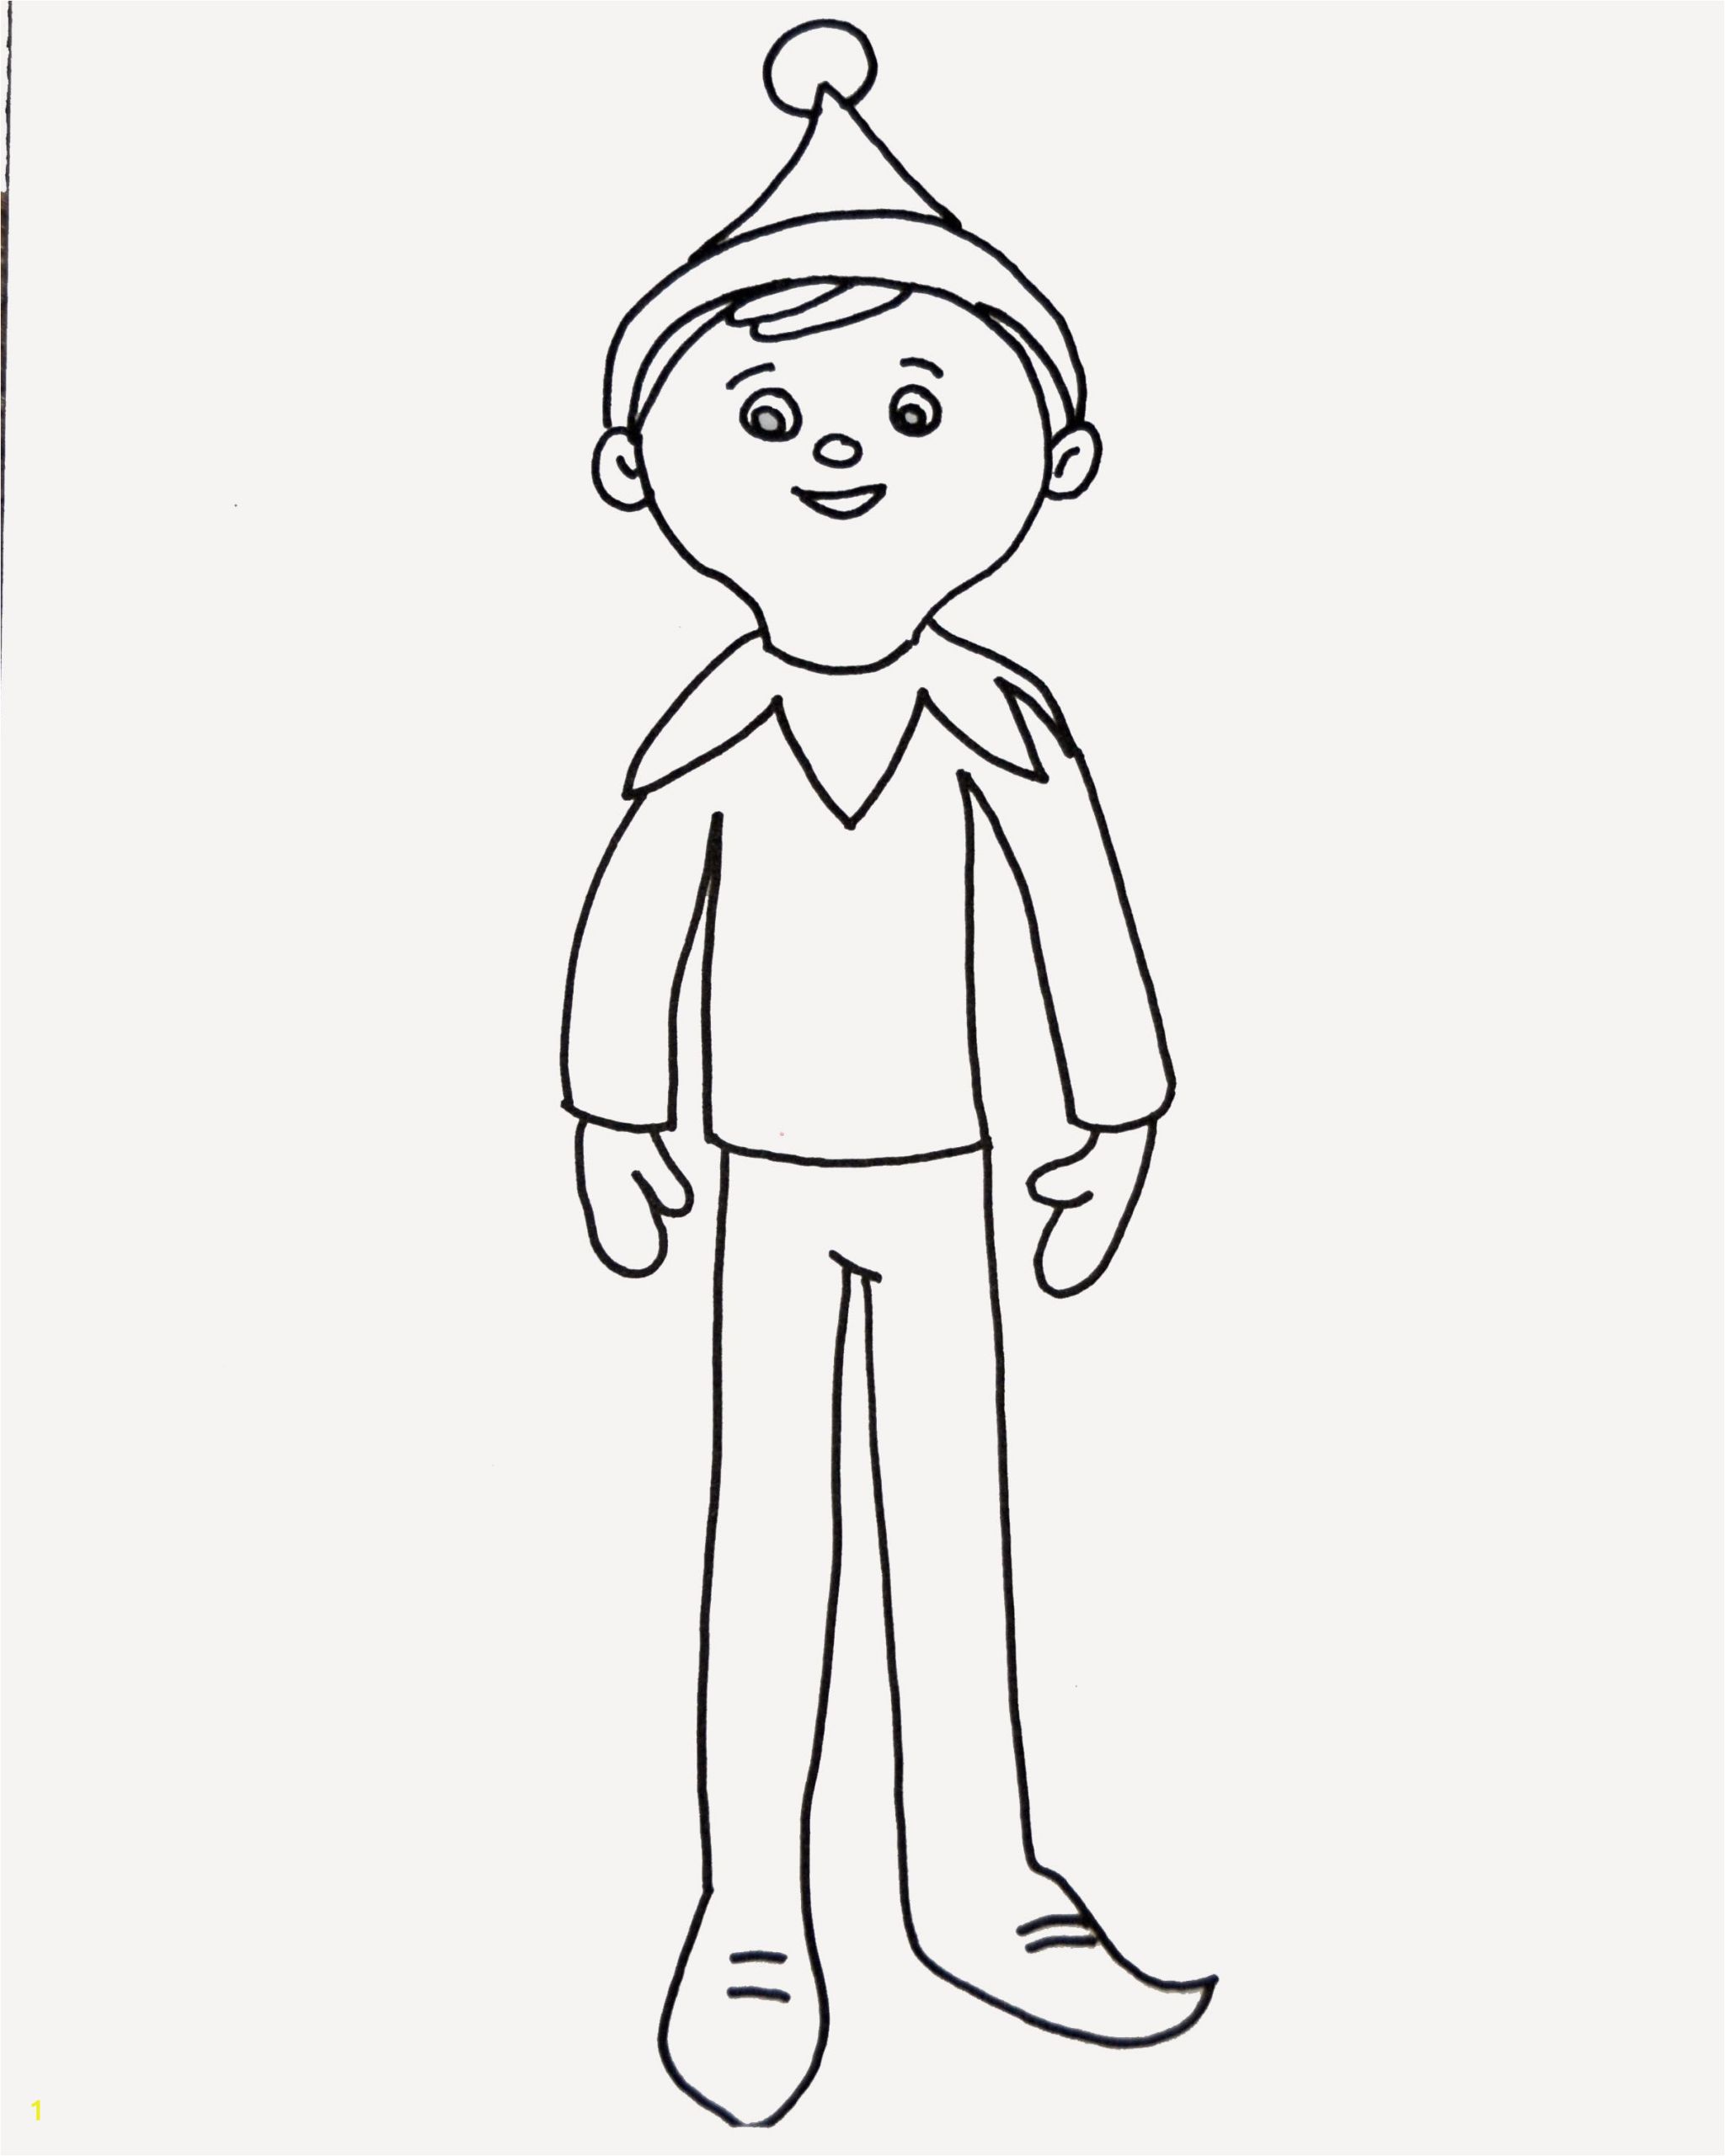 Girl Elf On the Shelf Coloring Pages Elf On the Shelf Coloring Page for Elfie and the Kids to